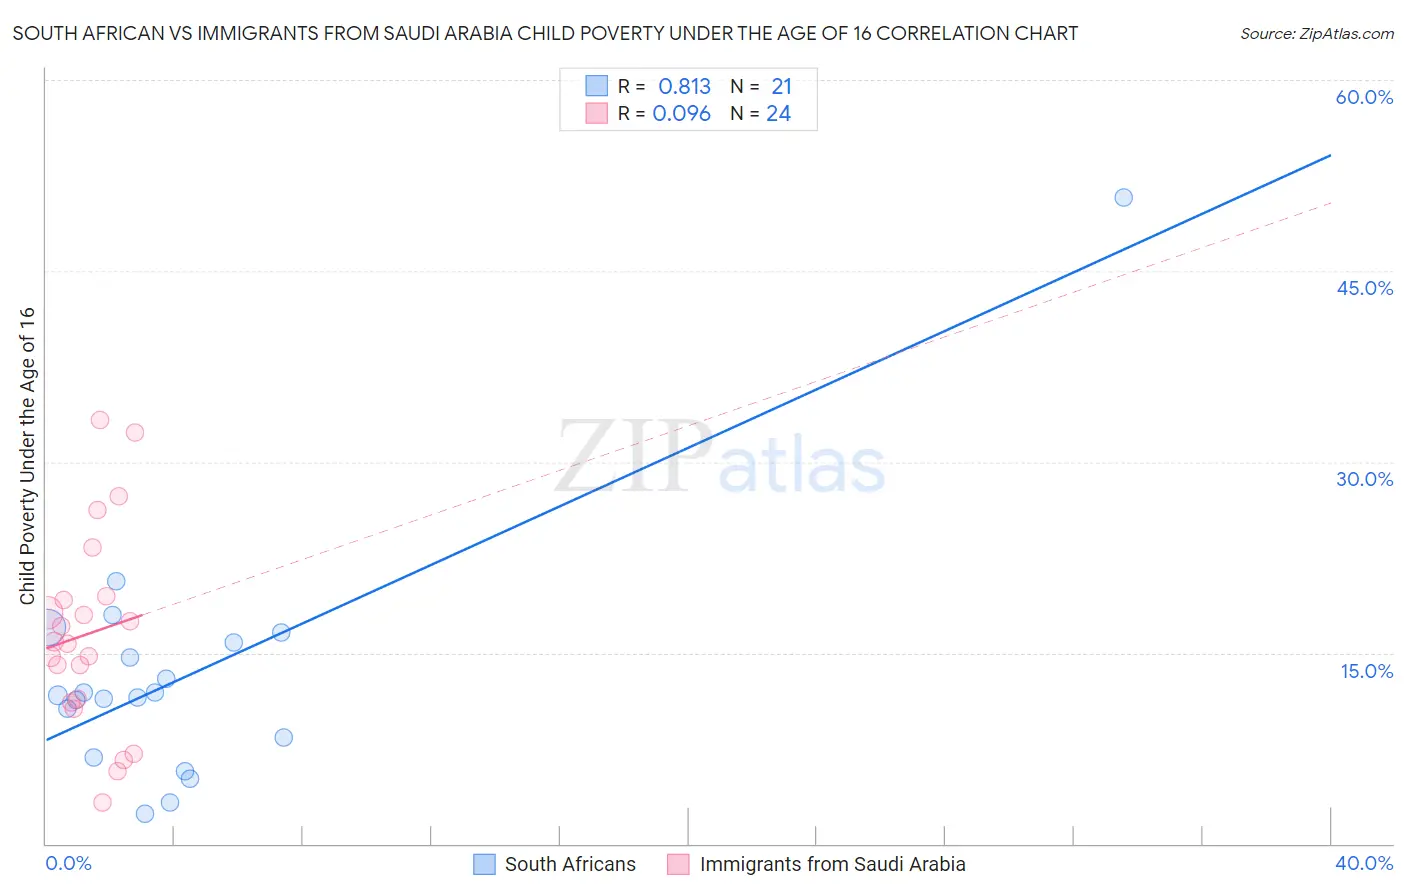 South African vs Immigrants from Saudi Arabia Child Poverty Under the Age of 16